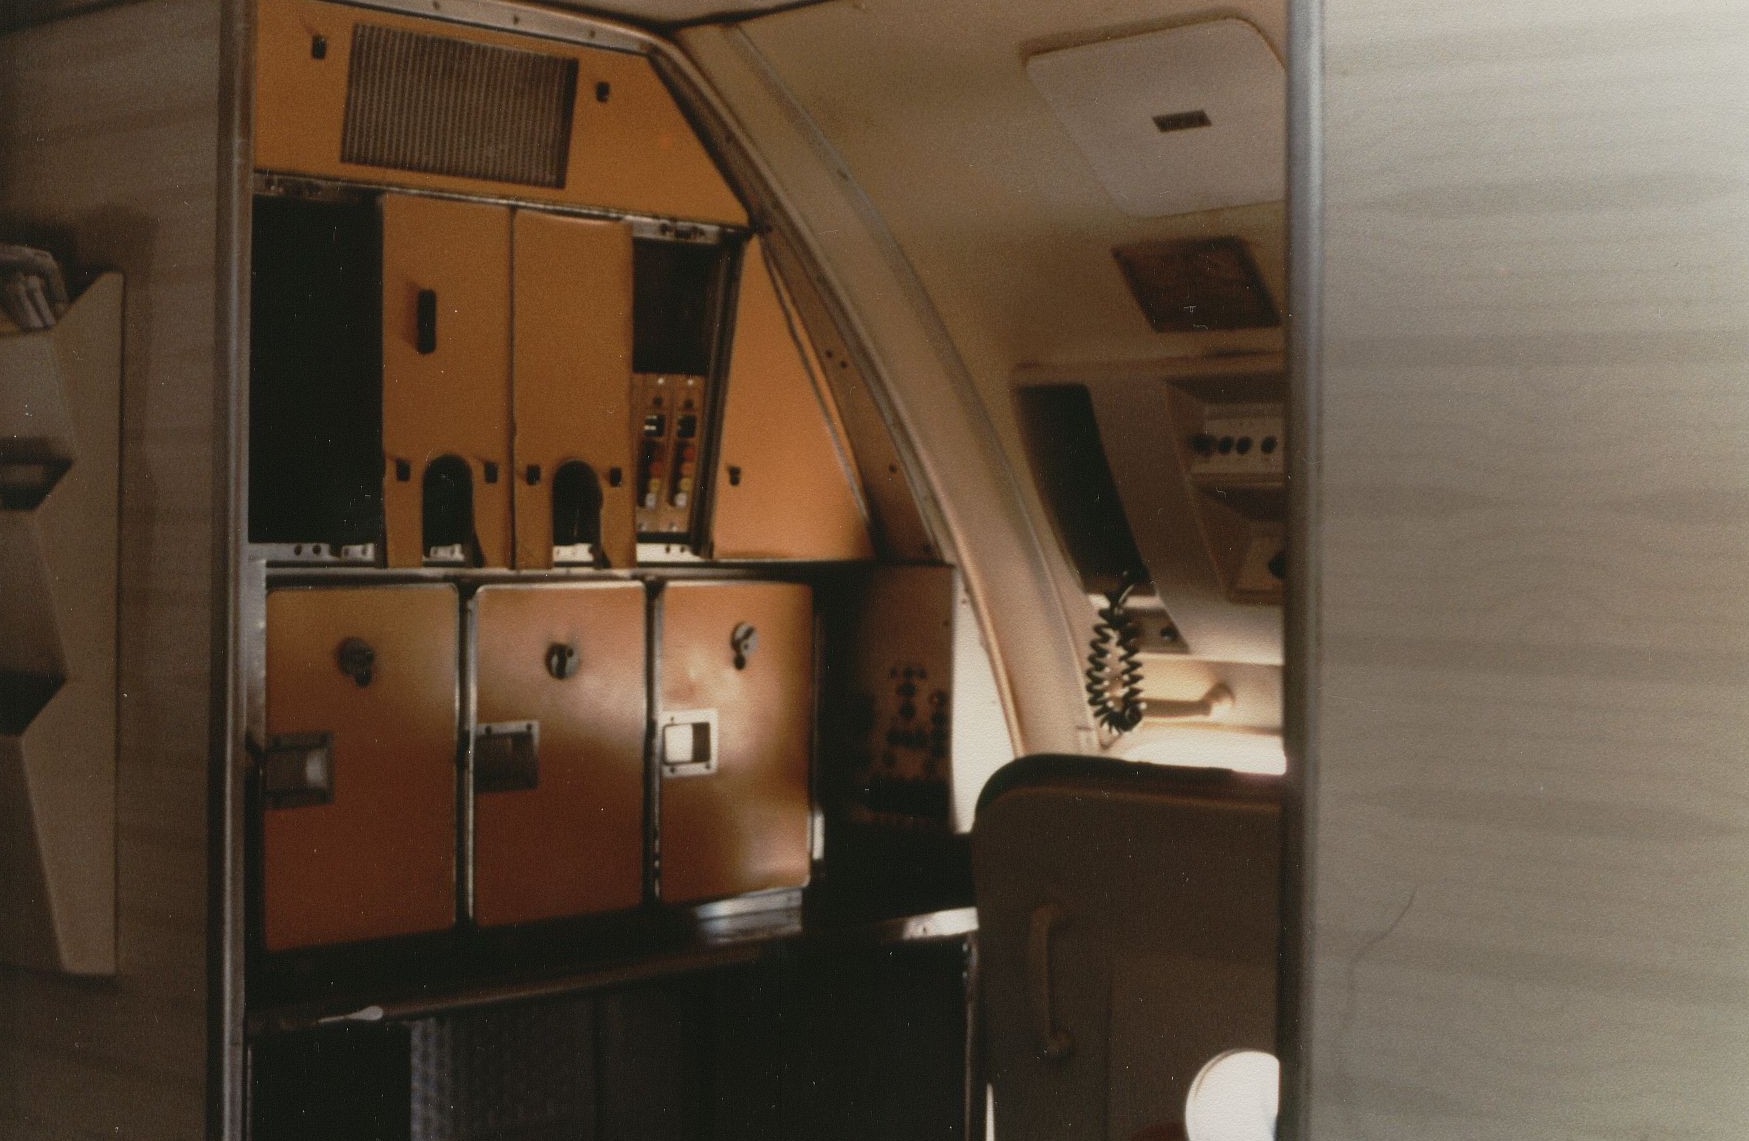 August 1981 The rear galley of a Pan Am Boeing 707 with the galley service door slightly ajar.